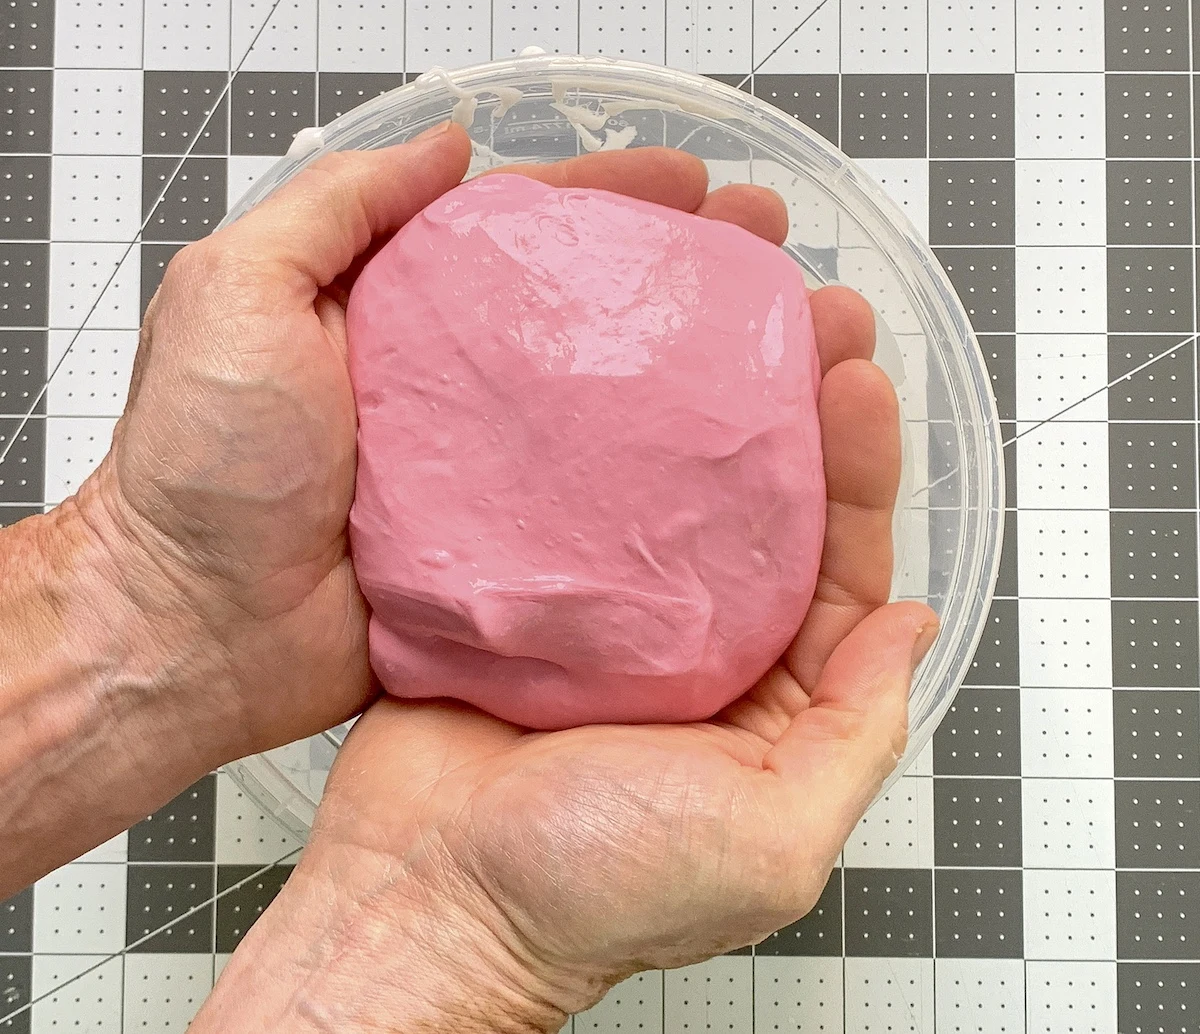 Finished ball of clay slime in a person's hands